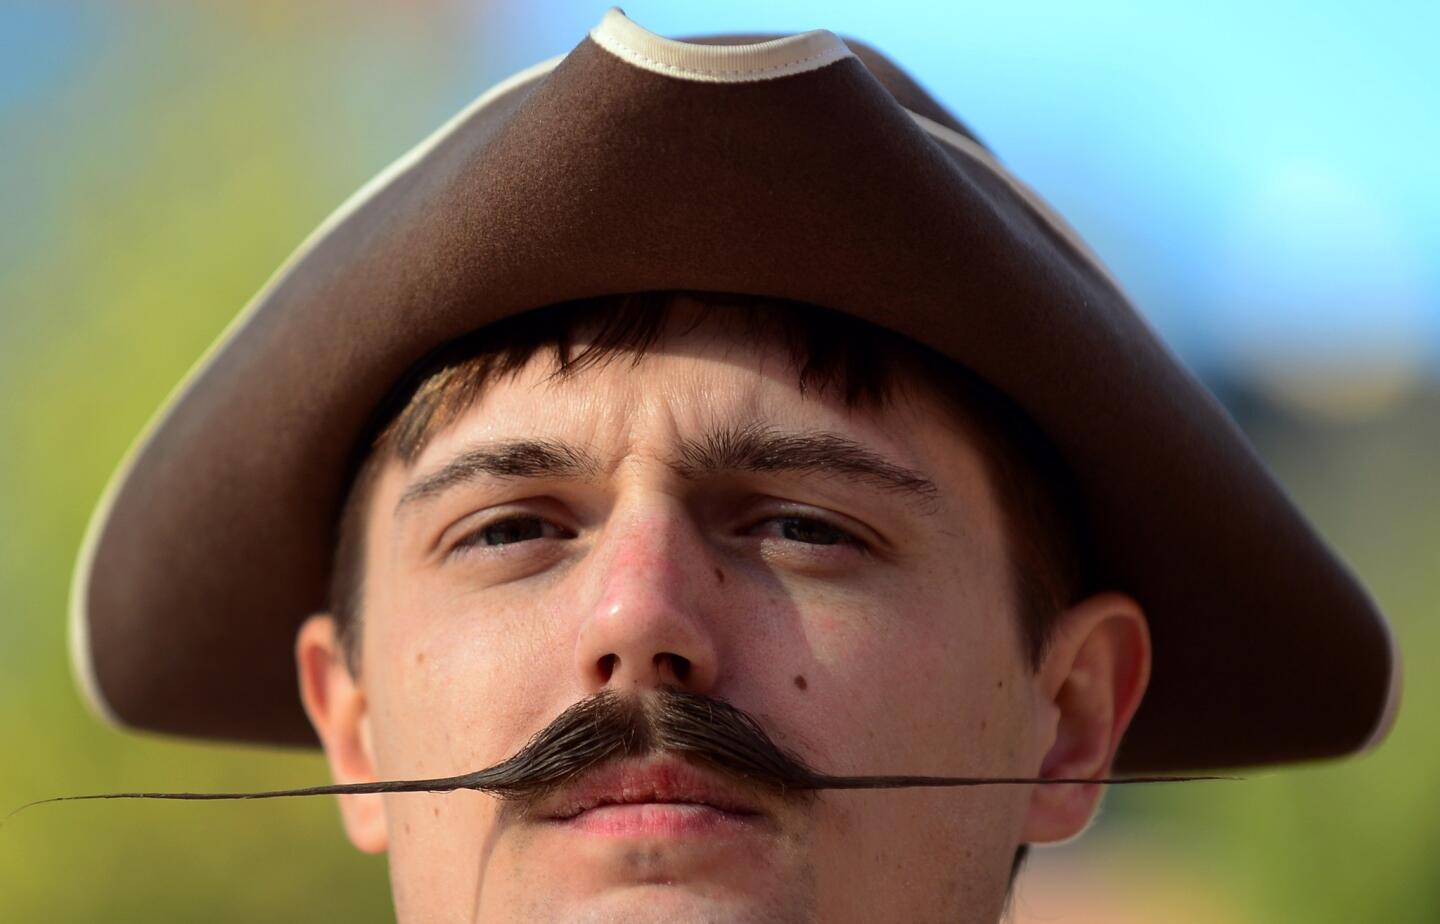 Patrick Fette from Louisville, Ky., took first place in the English mustache category.